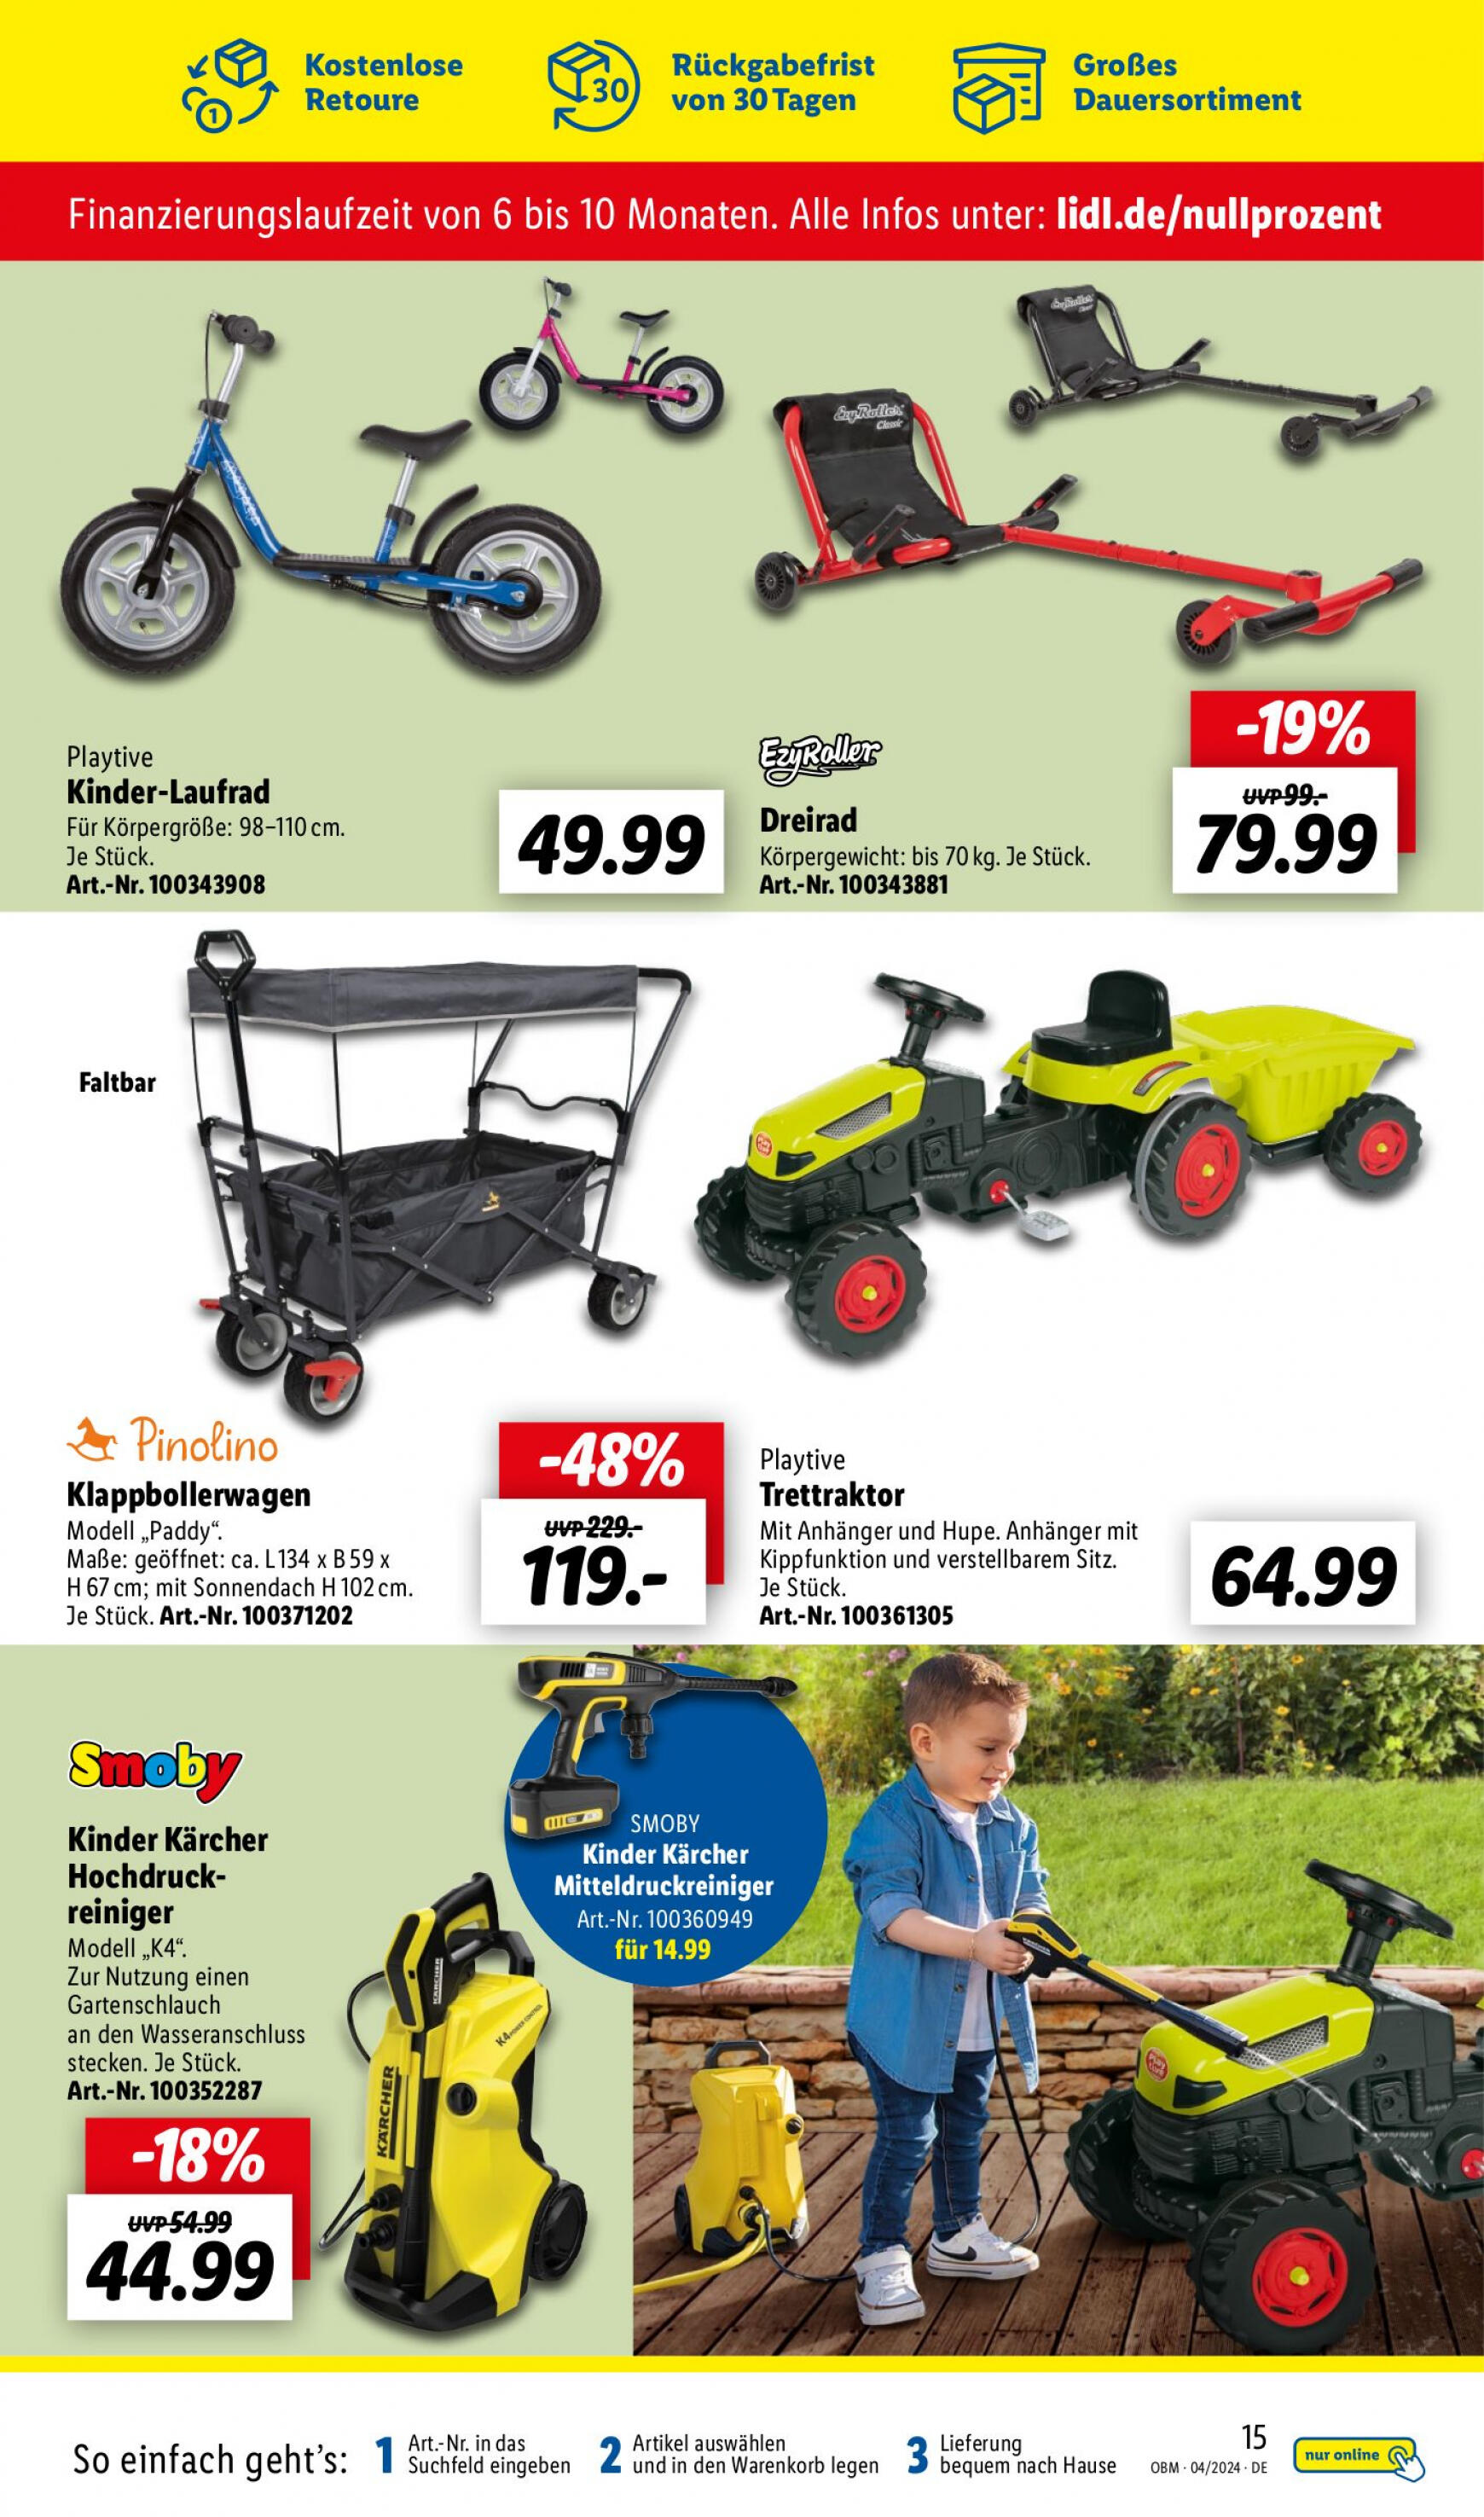 lidl - Flyer Lidl - Aktuelle Onlineshop-Highlights aktuell 01.04. - 30.04. - page: 15